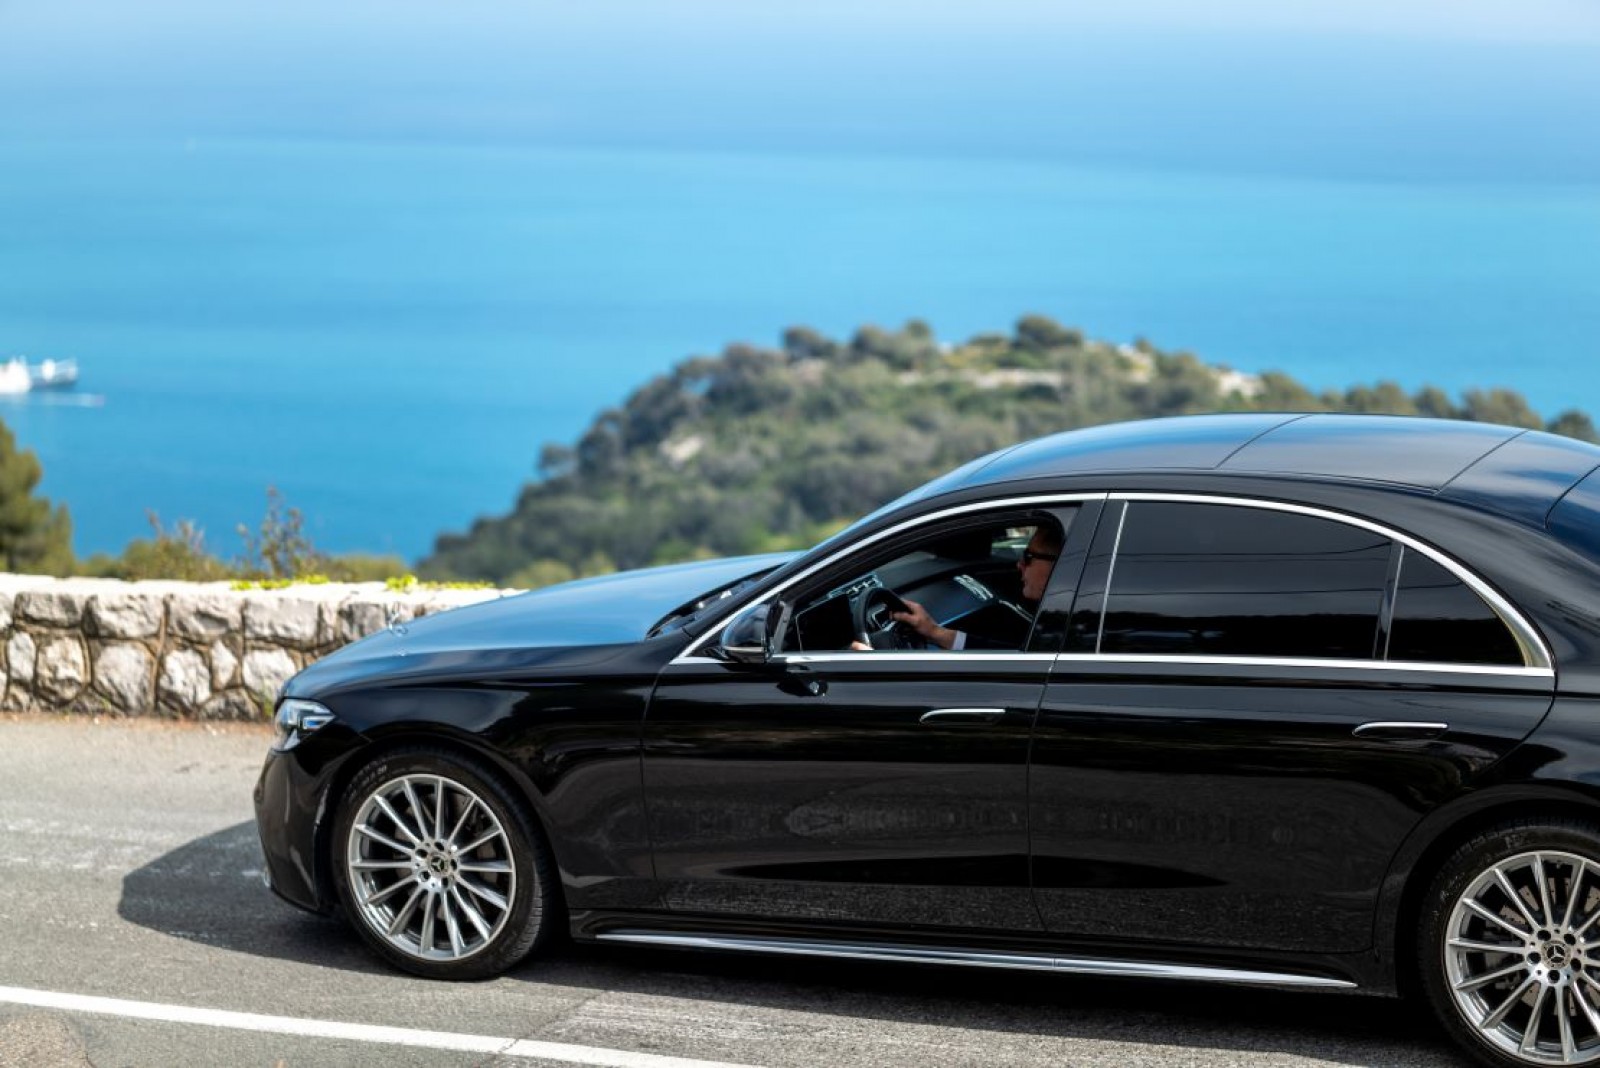 Limo Service with Private Driver in Saint Tropez - 24/7 Service -  VIP Limousine Service - Book Online - Tailor-Made Quote 